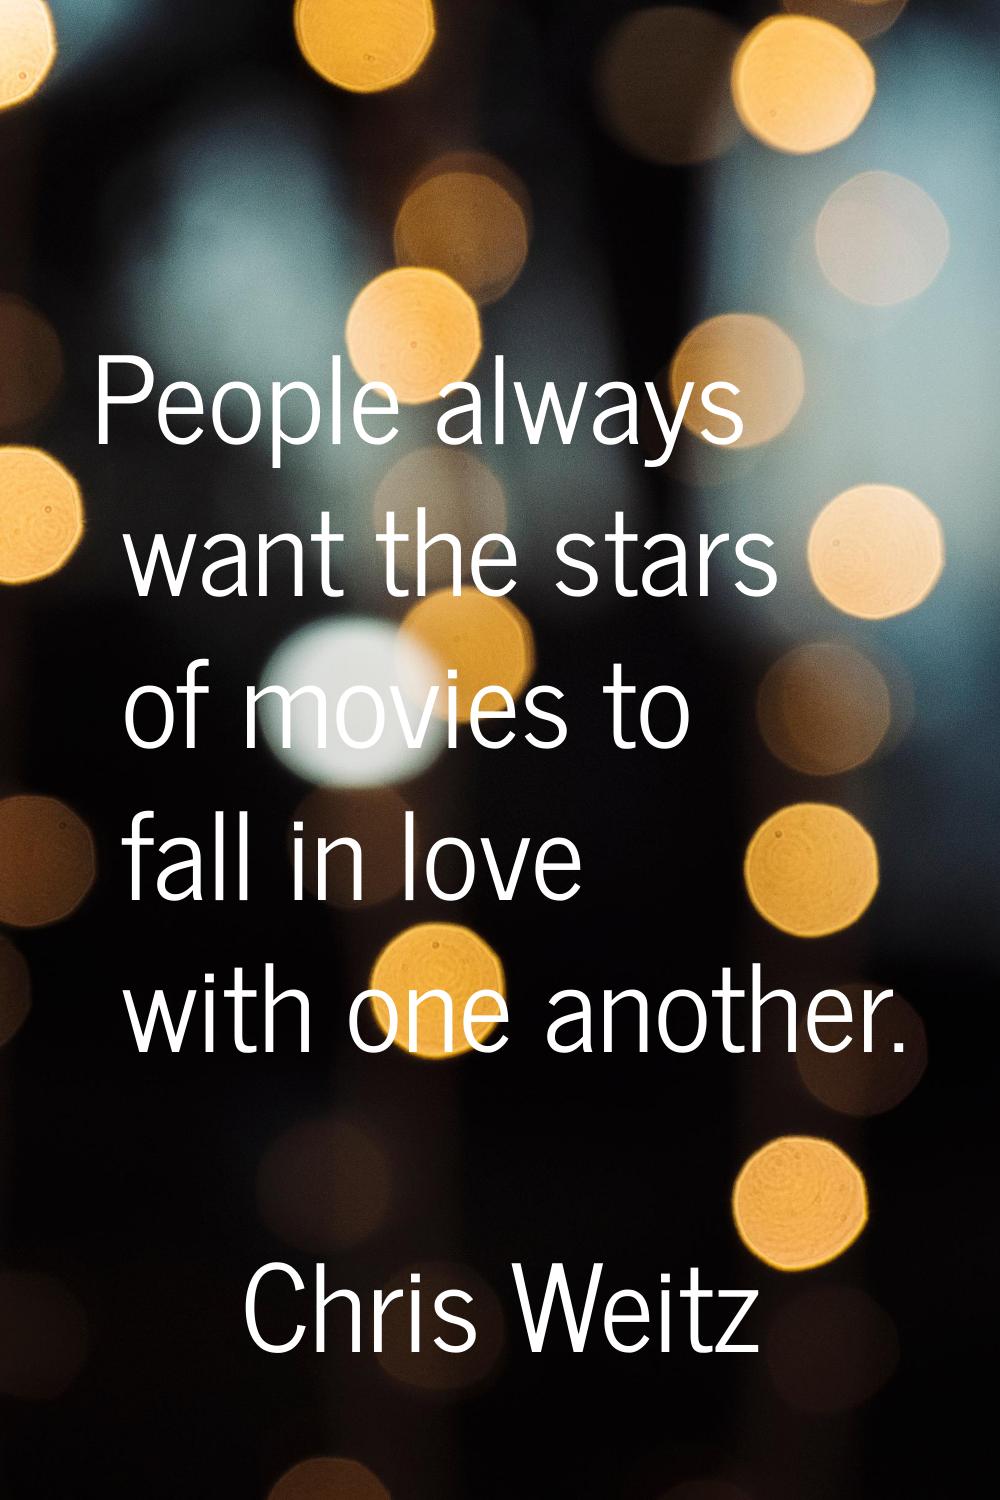 People always want the stars of movies to fall in love with one another.